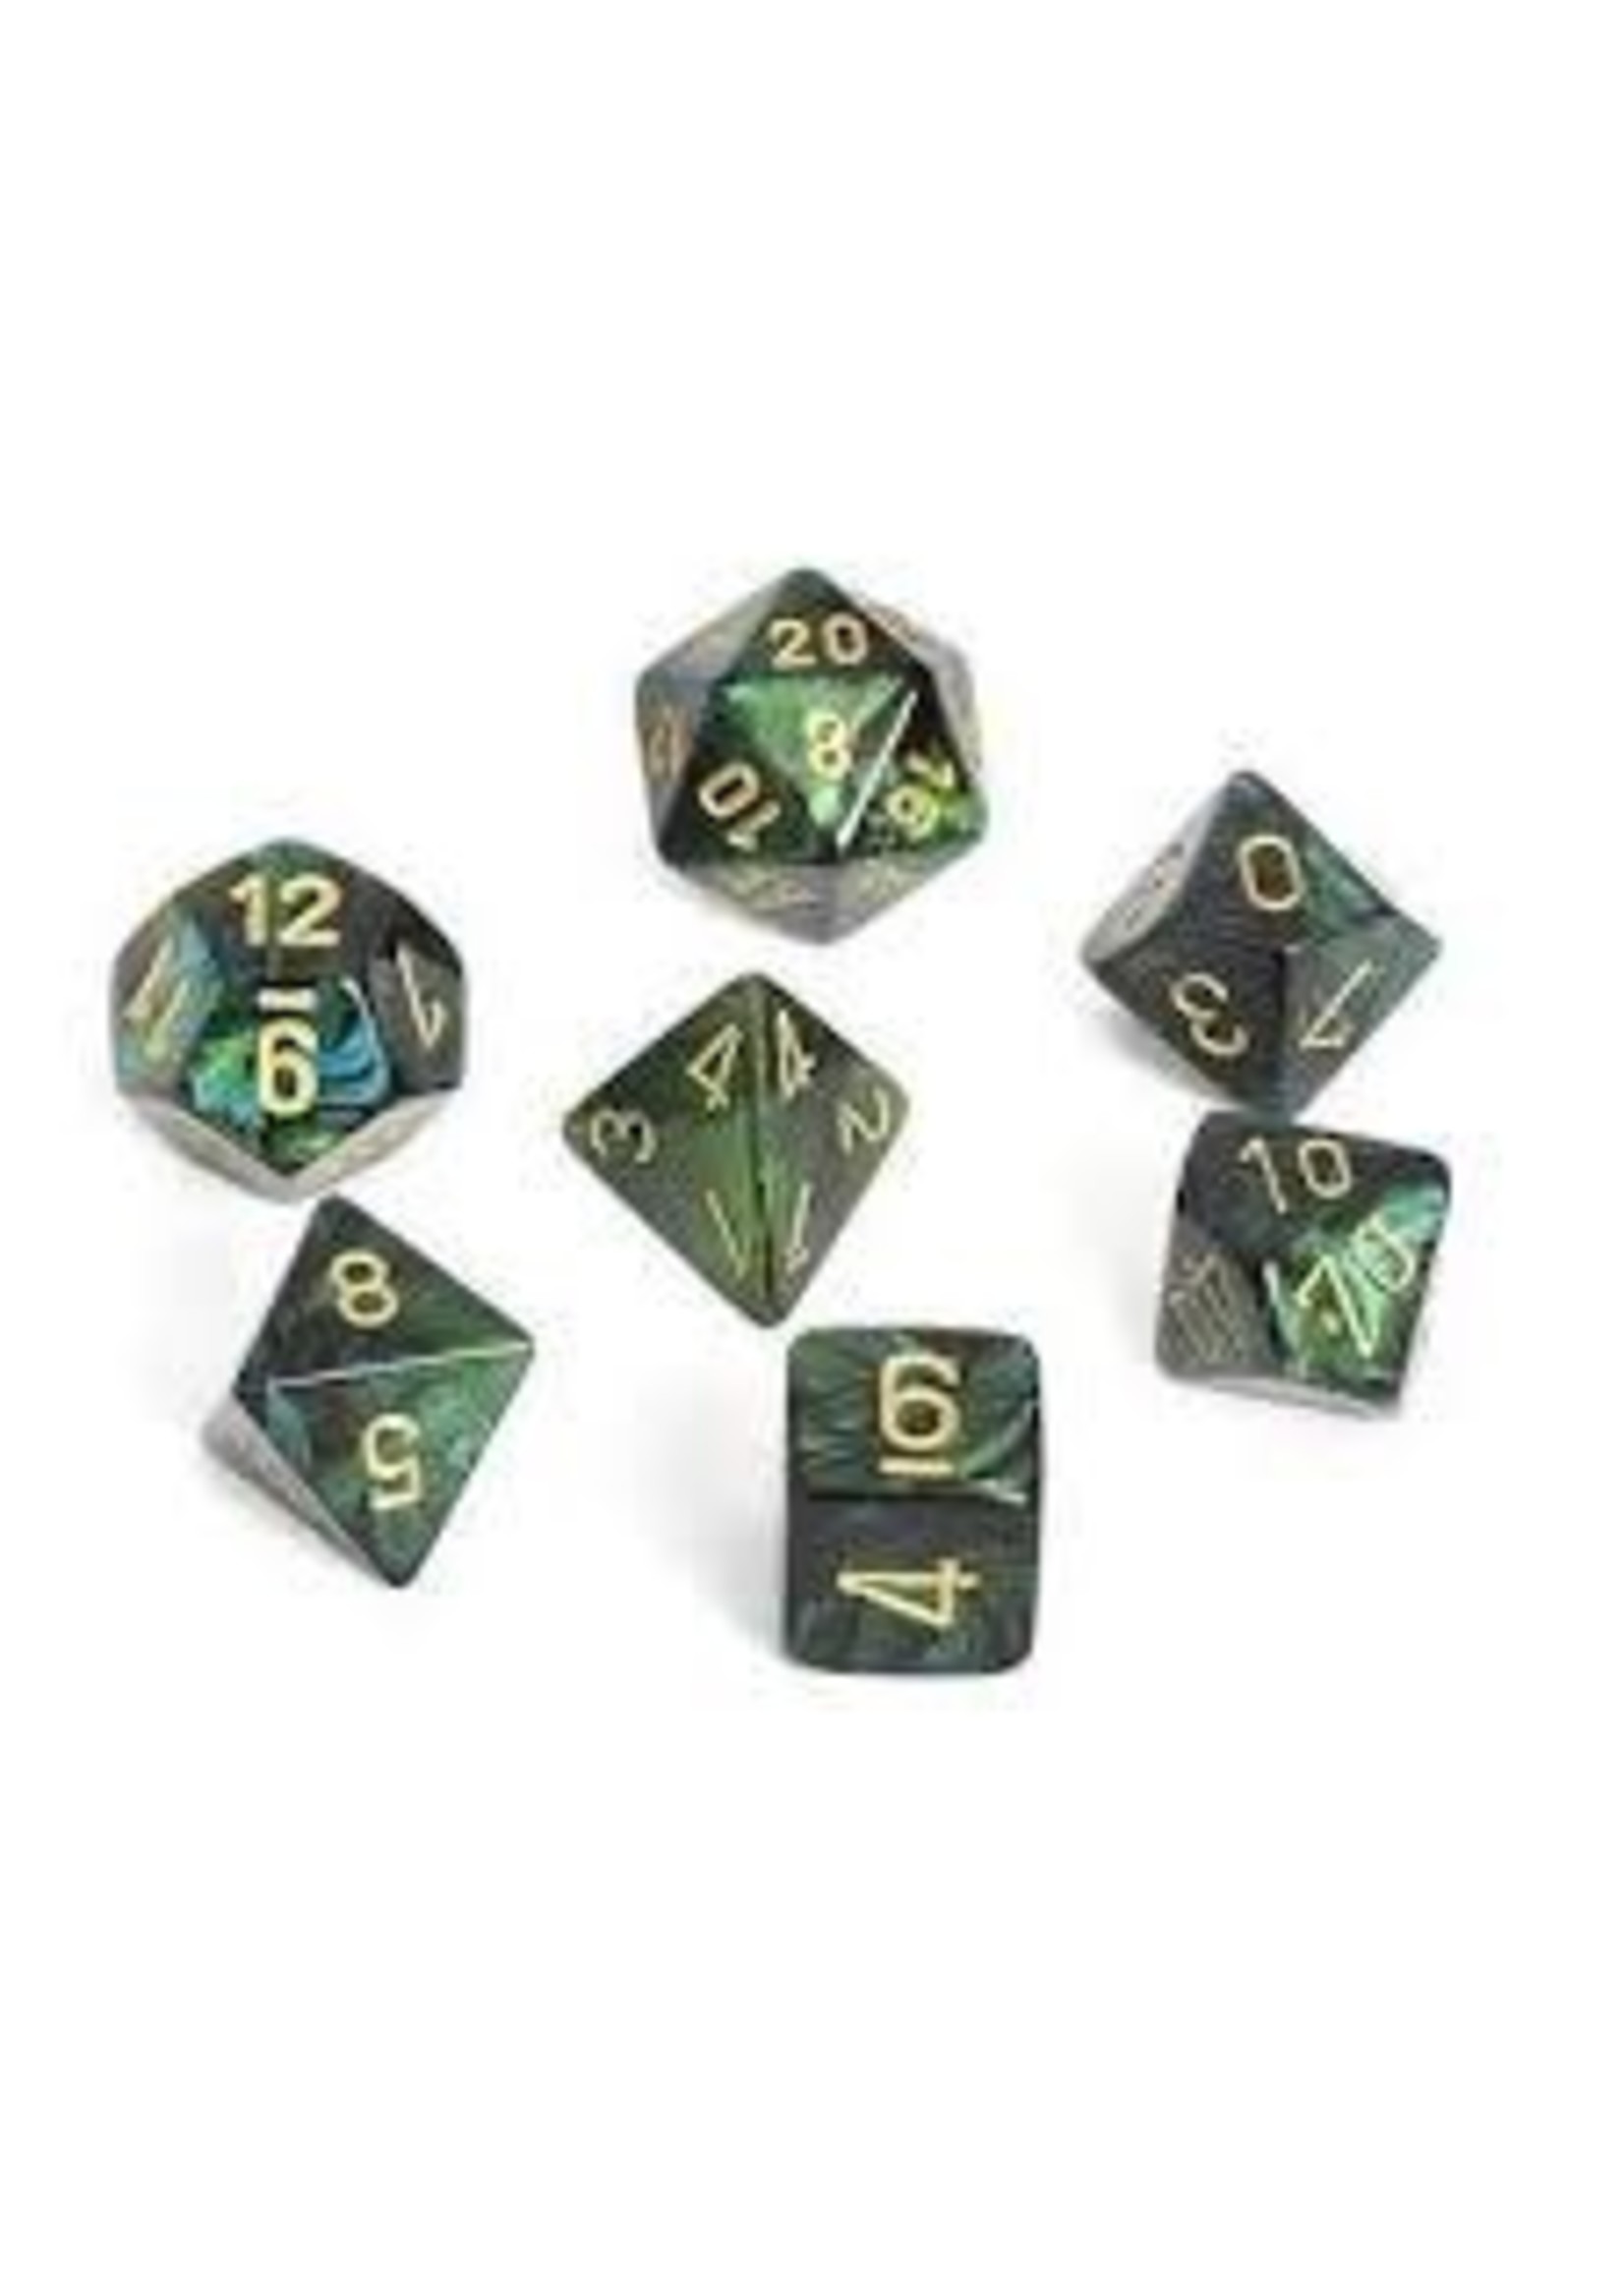 Chessex Scarab Poly 7 set: Jade w/ Gold